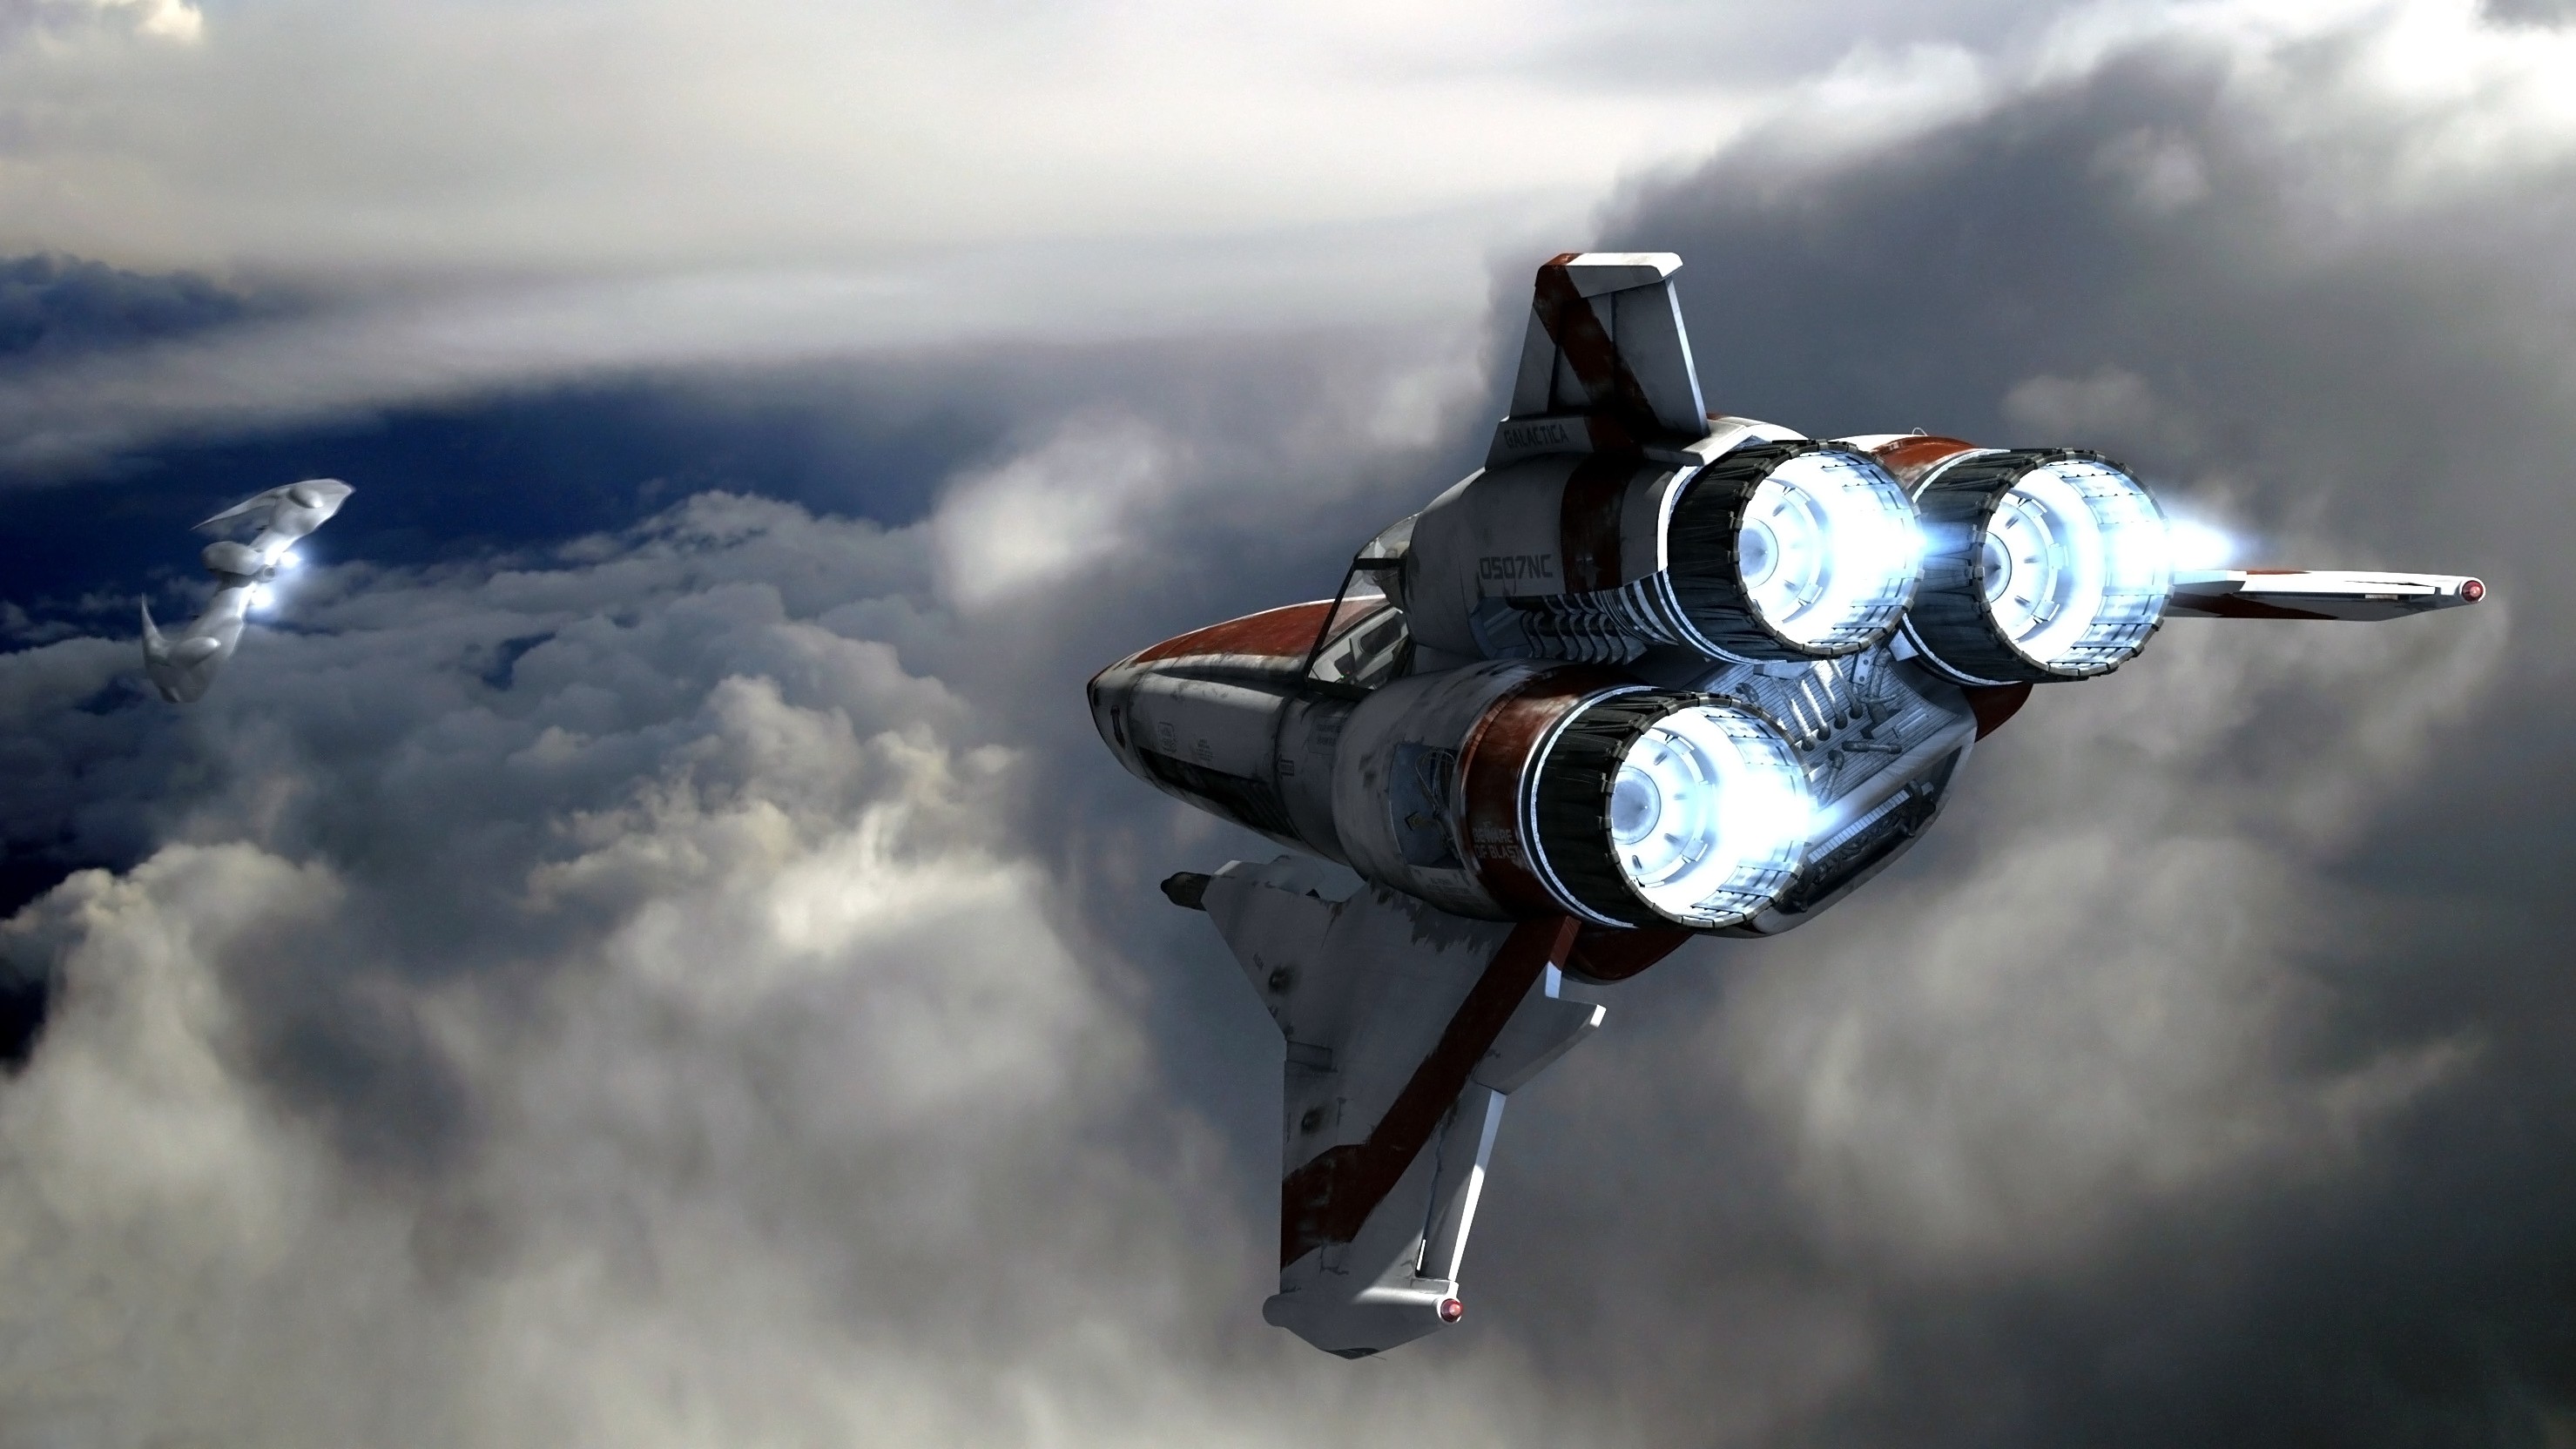 Wallpaper, digital art, sky, futuristic, vehicle, clouds, airplane, science fiction, spaceship, military aircraft, Battlestar Galactica, Cylons, air force, Flight, aviation, wing, screenshot, atmosphere of earth, fighter aircraft, aircraft engine, jet